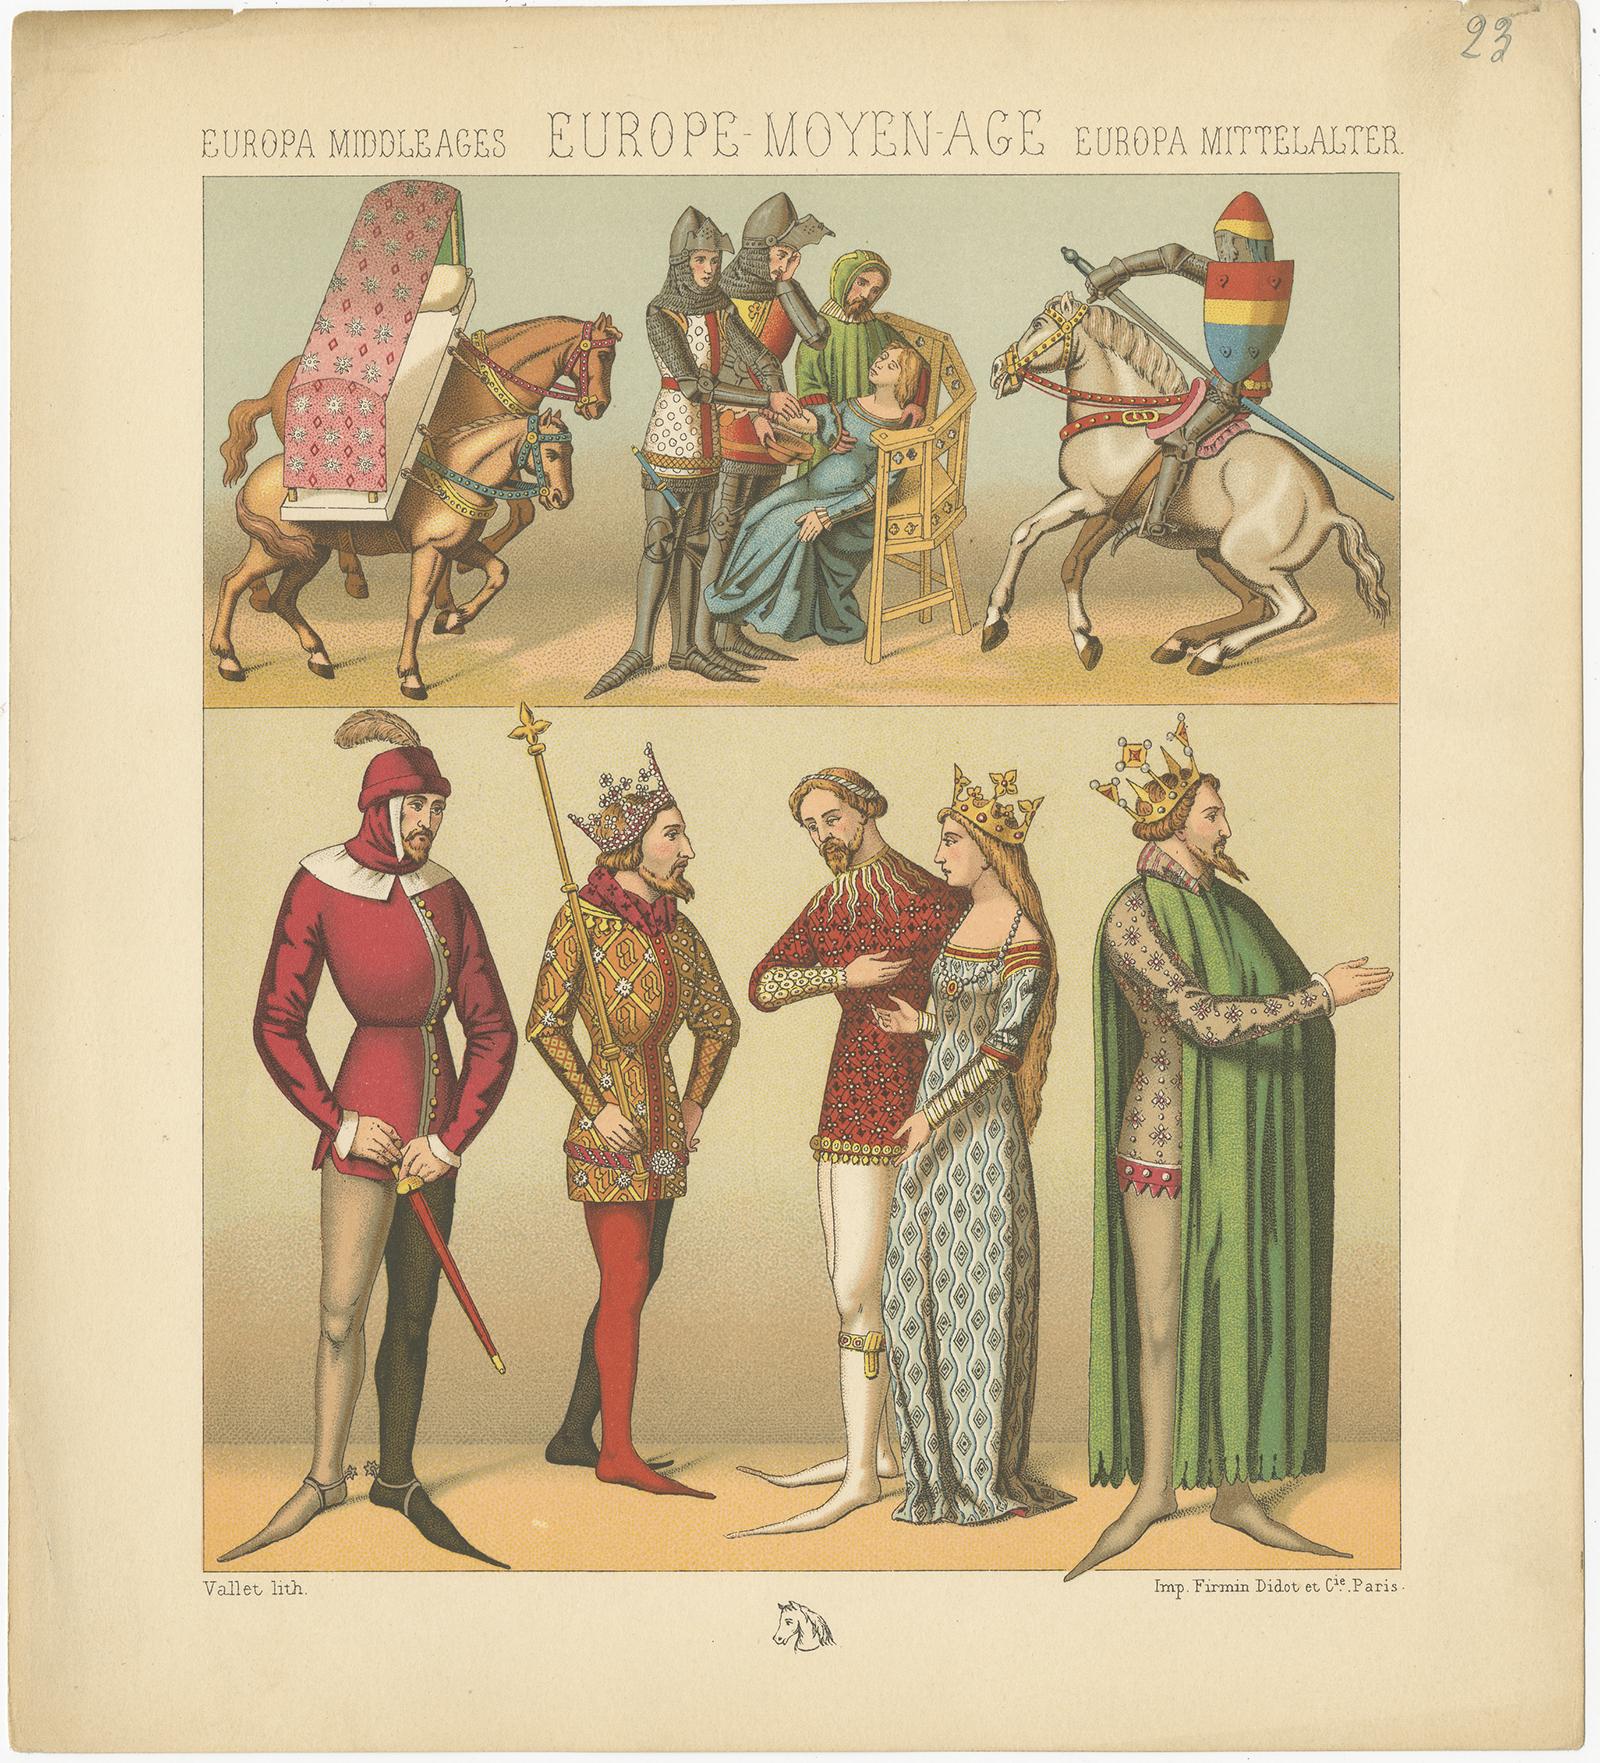 Antique print titled 'Europa Middle Ages - Europe Moyen Age - Europa Mittelalter'. Chromolithograph of European Middle Ages Scene'. This print originates from 'Le Costume Historique' by M.A. Racinet. Published circa 1880.